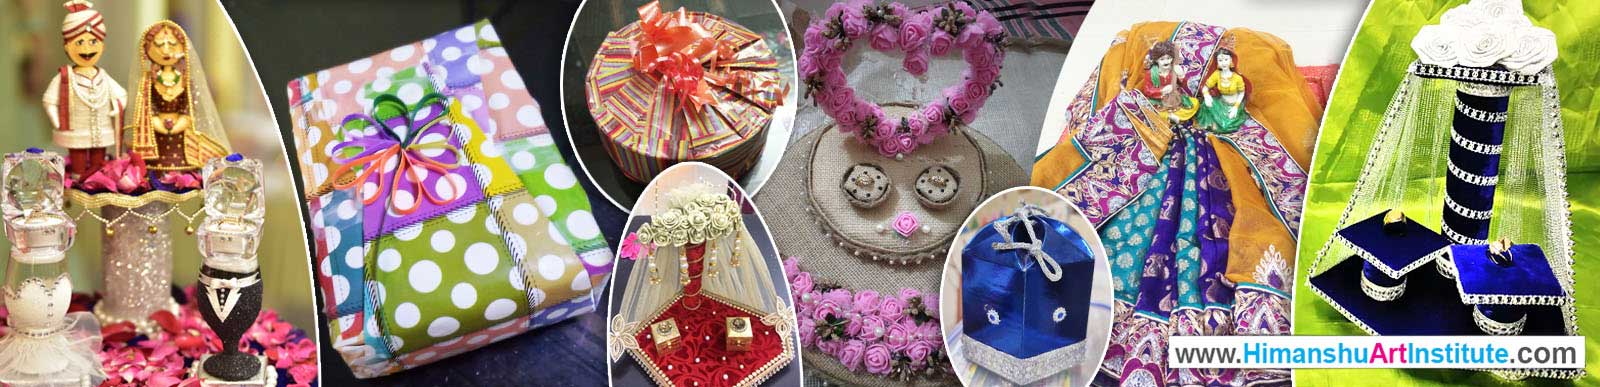 Gift Packing Classes, Art & Craft Institute in Delhi, Professional Certificate Course in Gift Packing